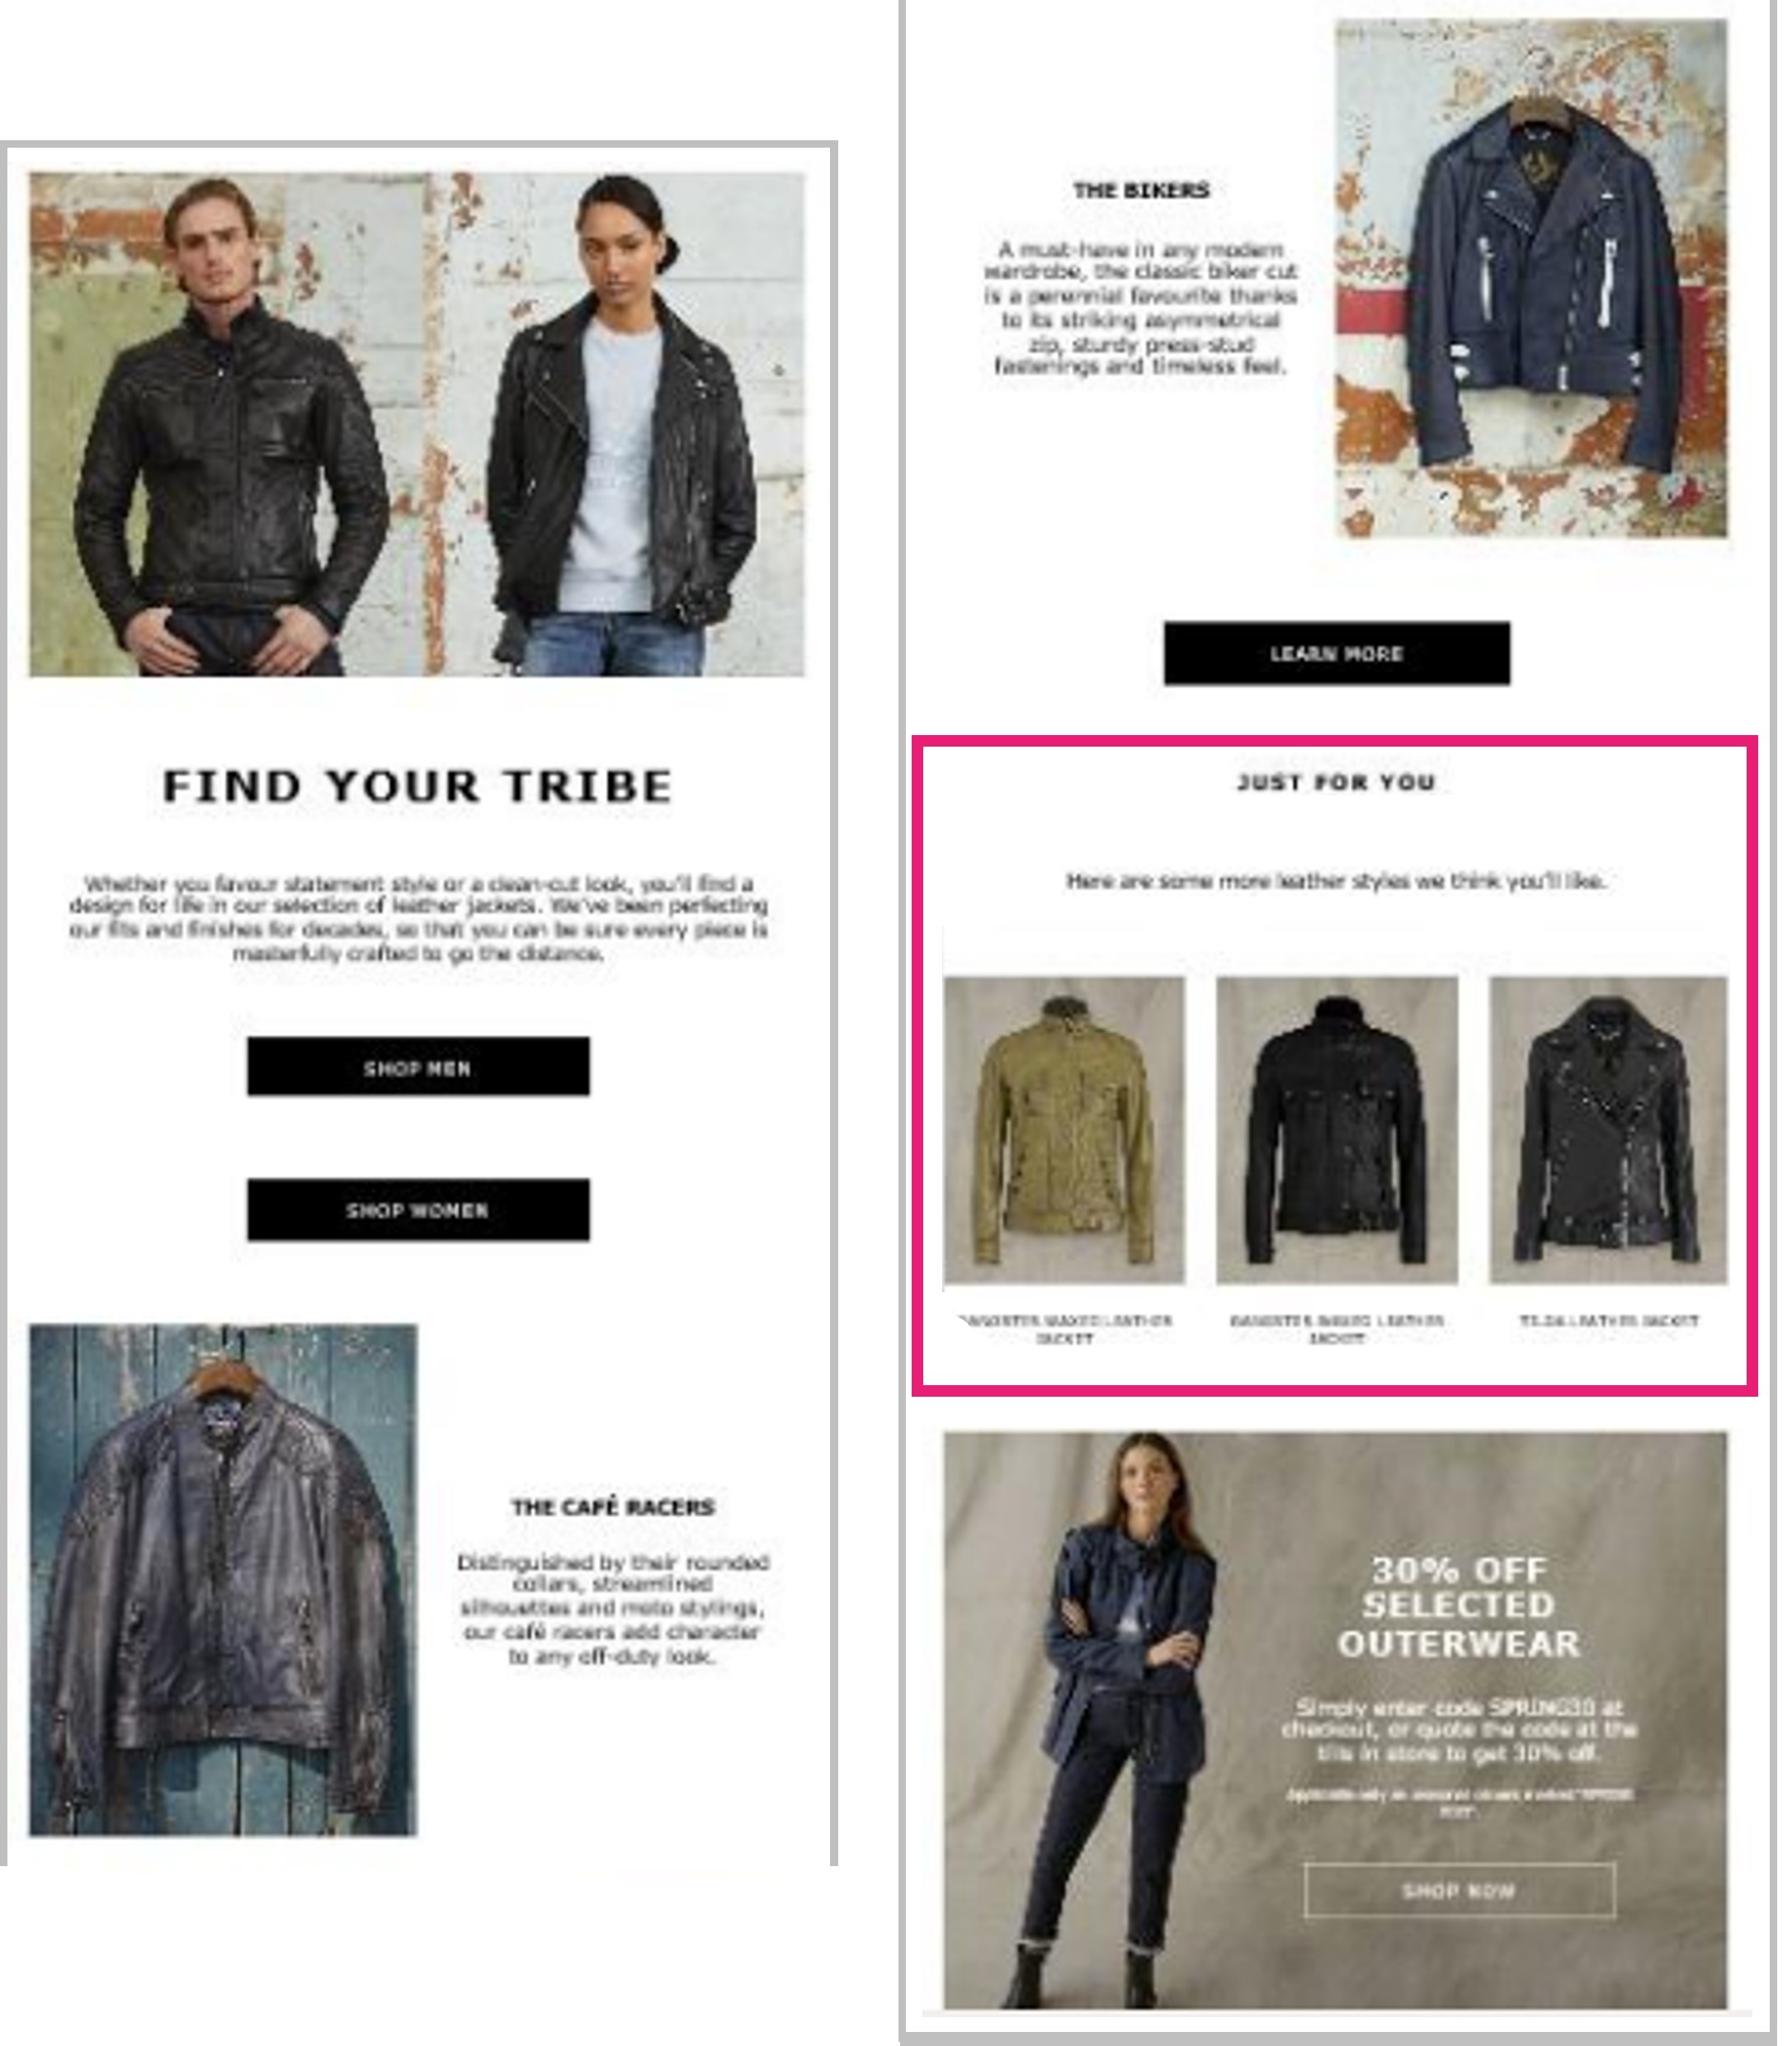 Personalized product recommendations in a Belstaff email